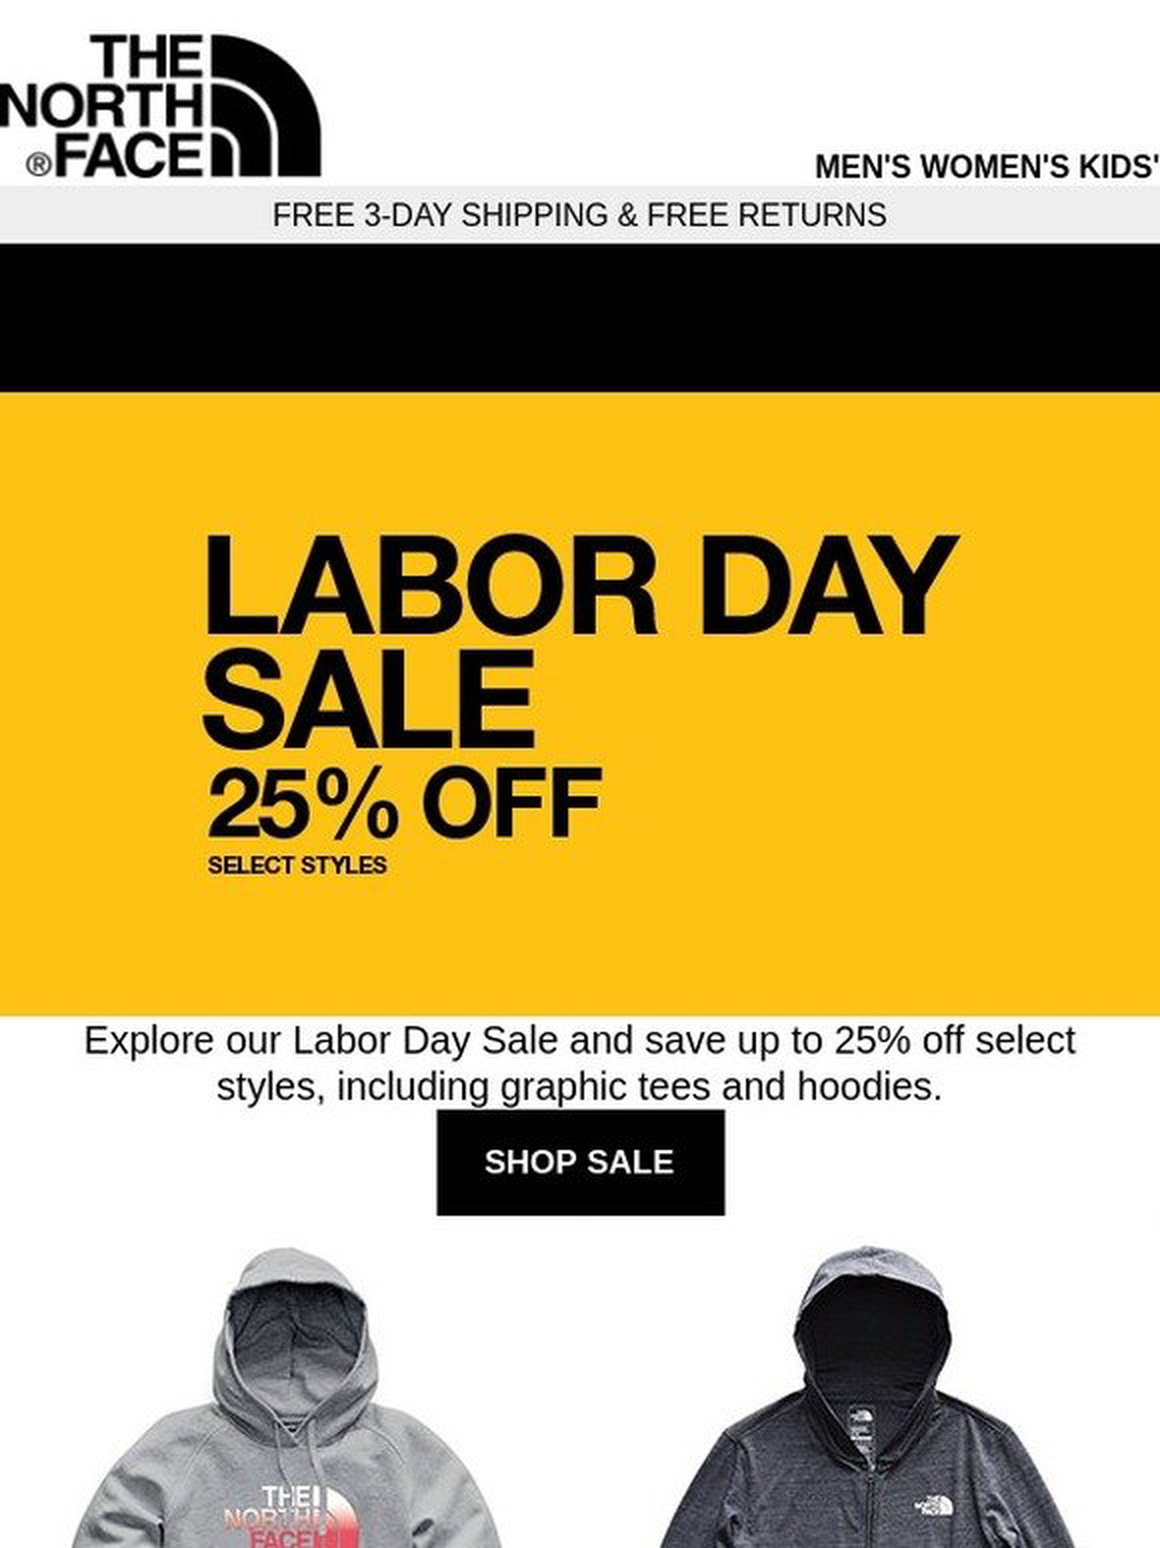 The North Face: The Labor Day Sale is 